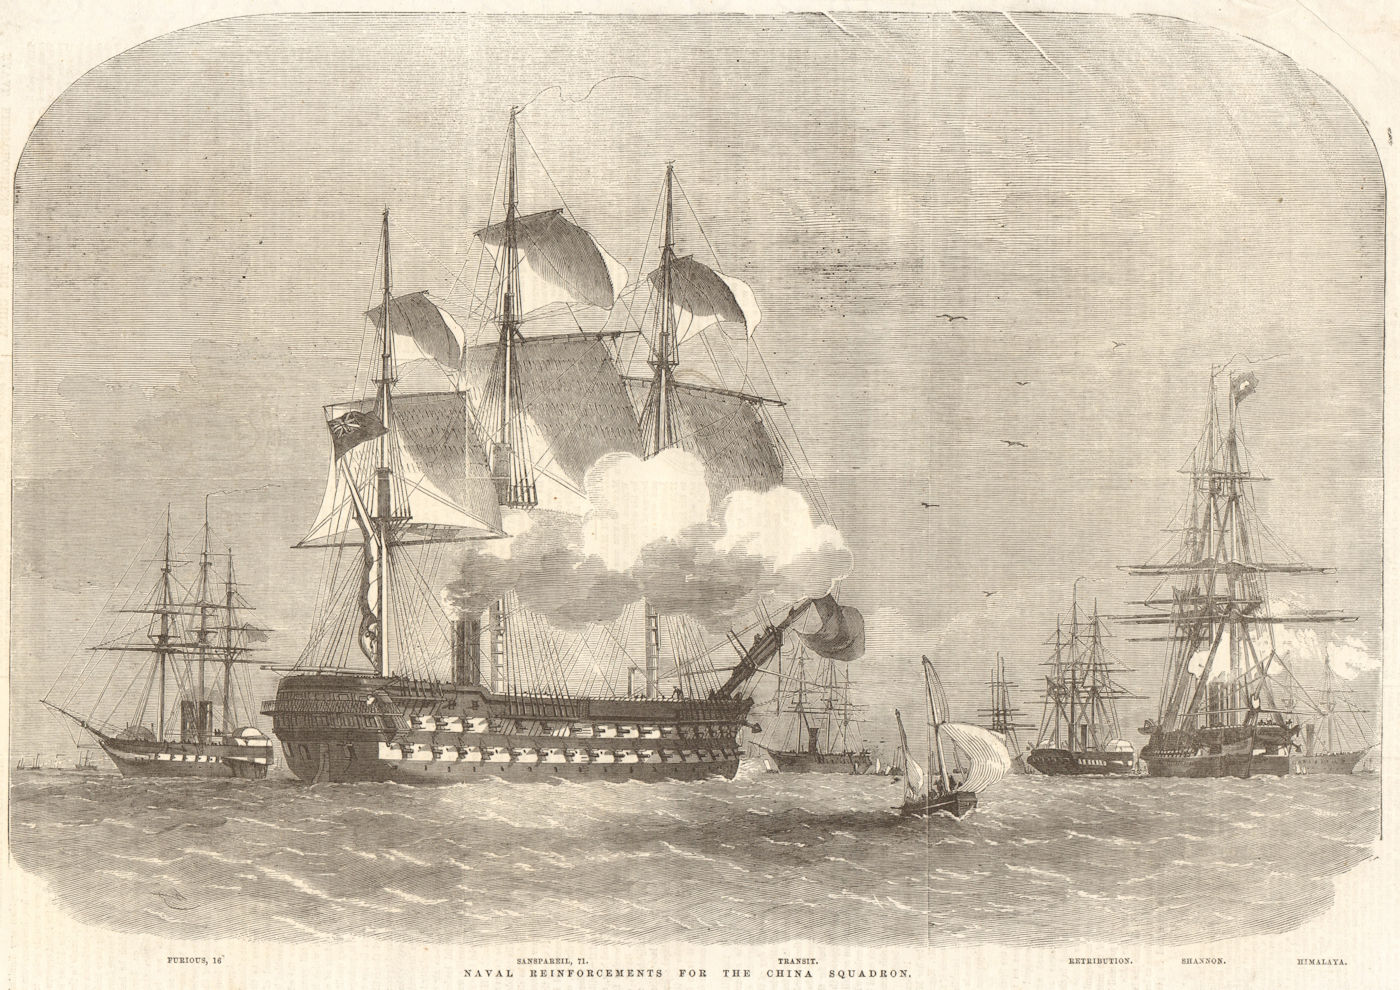 Associate Product Naval reinforcements for the China squadron. Ships 1857 antique ILN full page